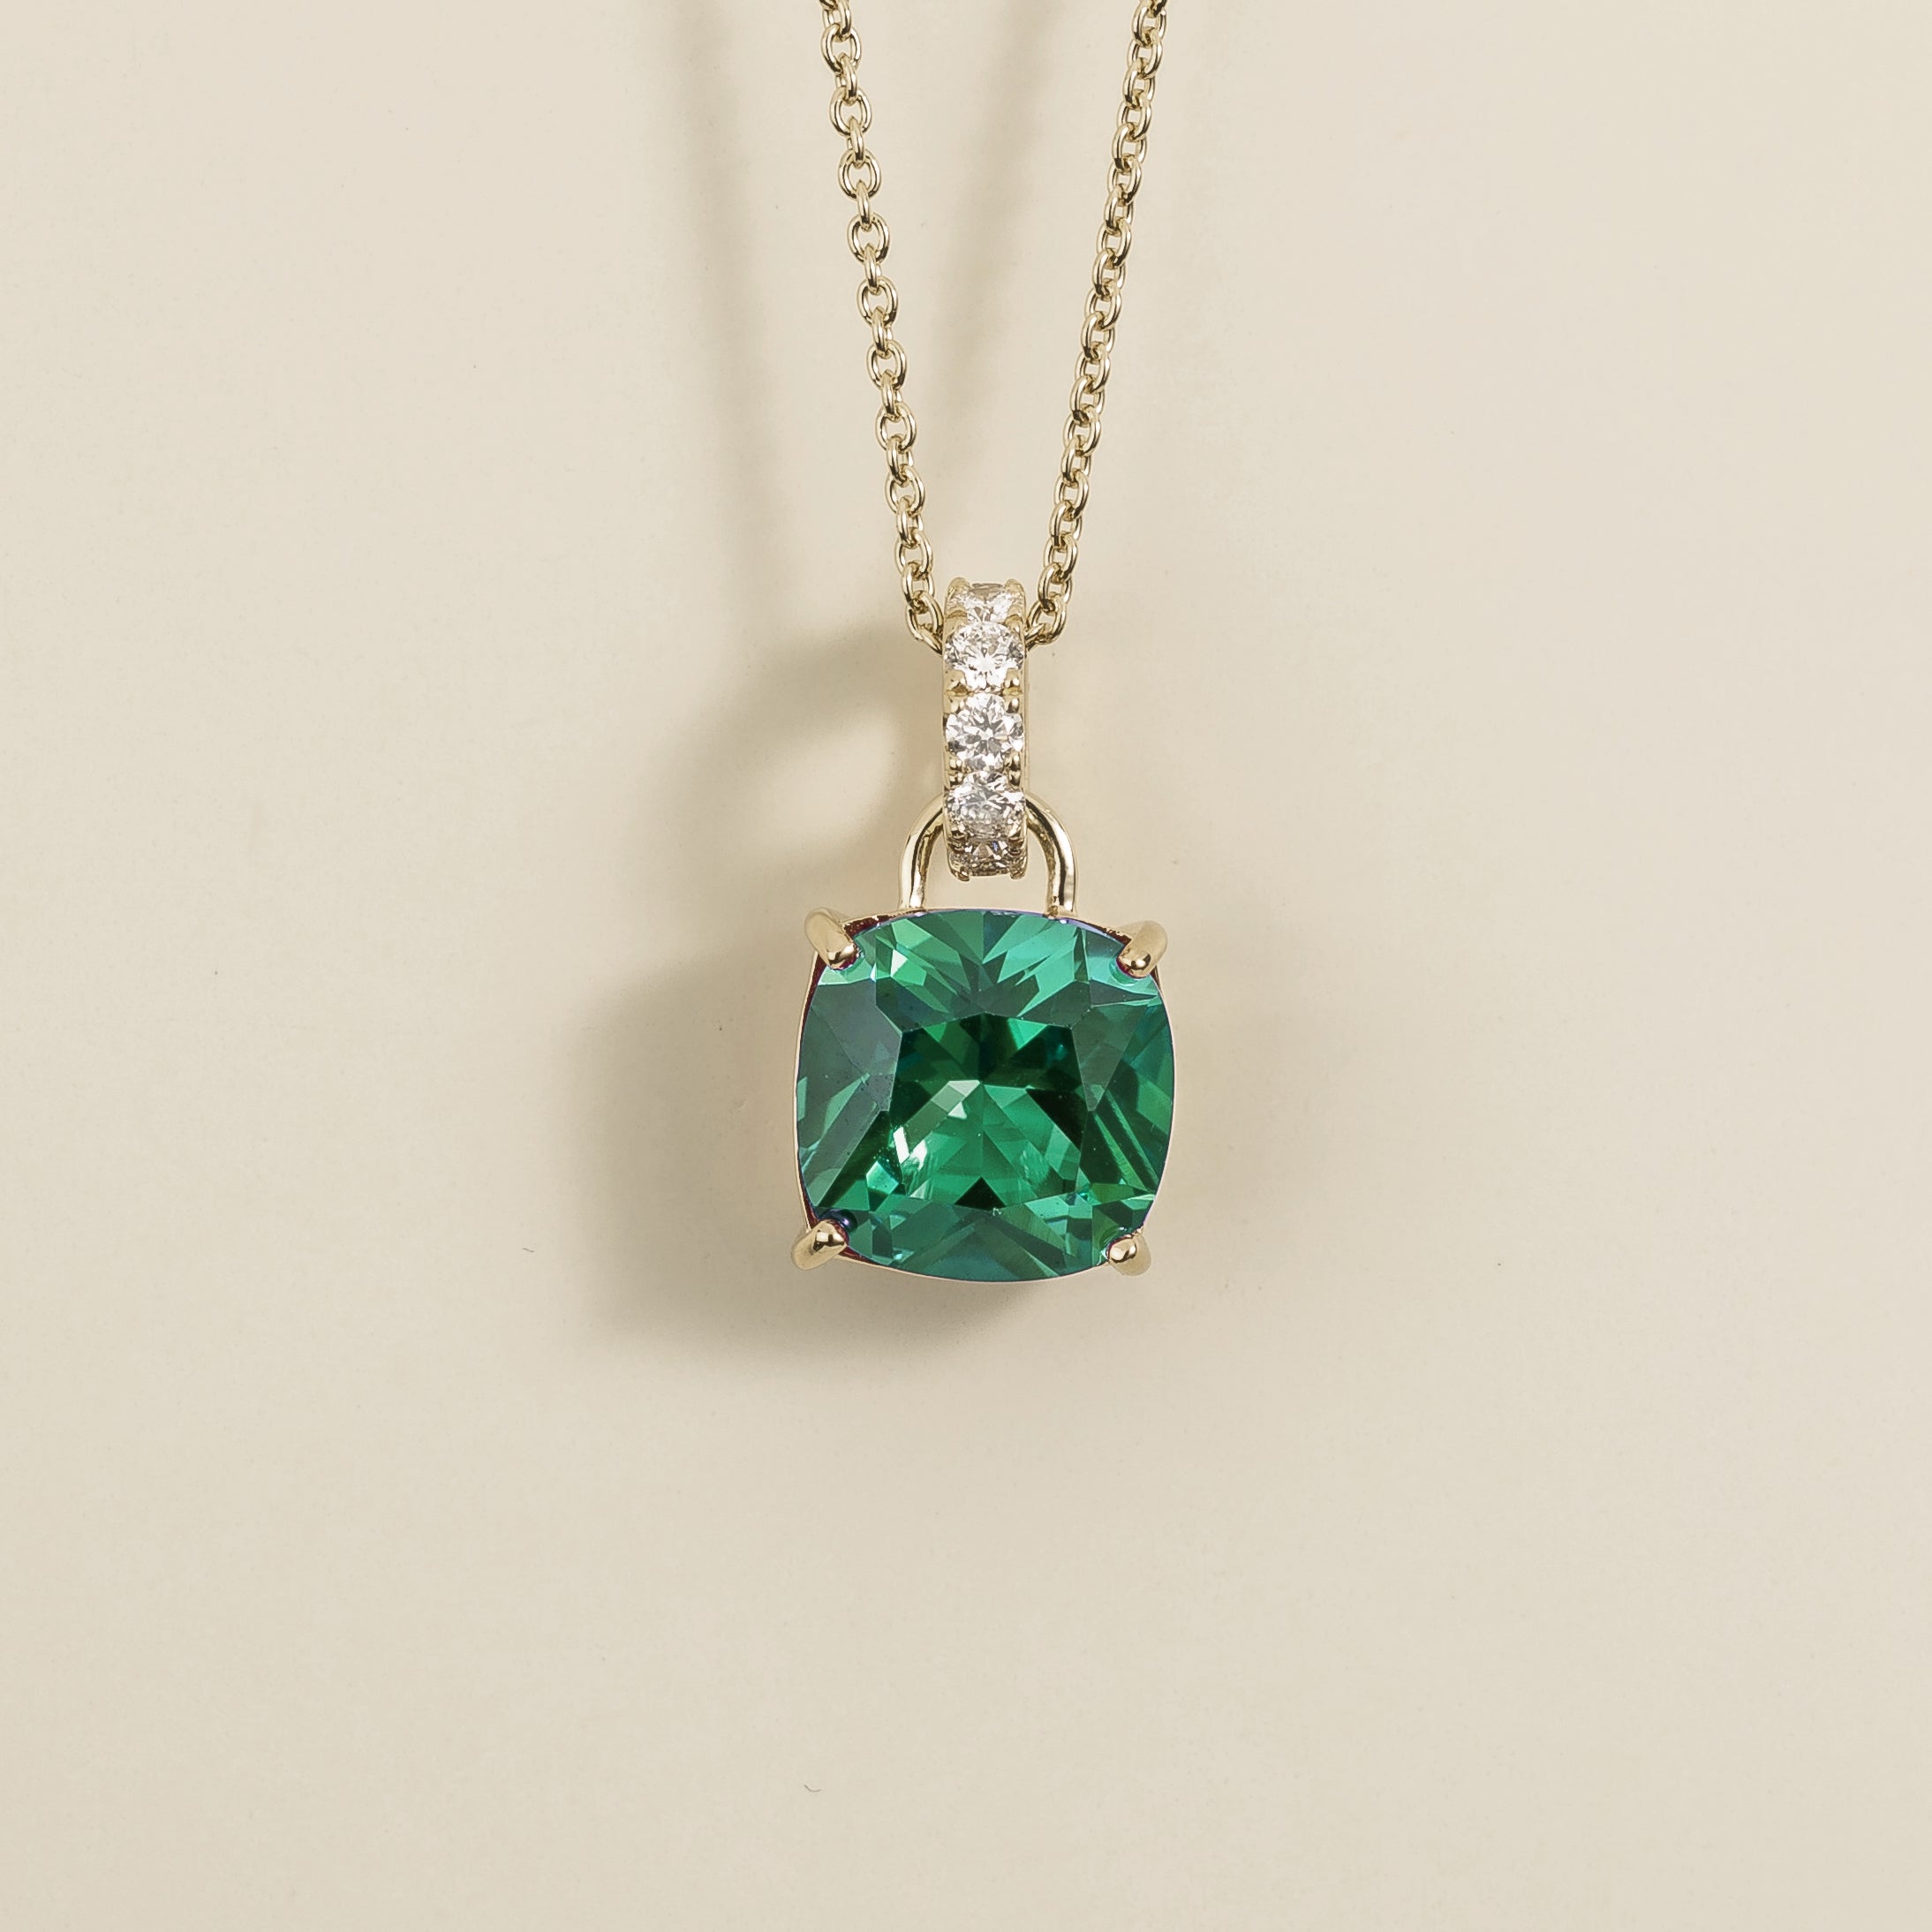 Emerald Earrings Juvetti Jewellery London Oreol Pendant Necklace In Emerald and Diamond Set In White Gold